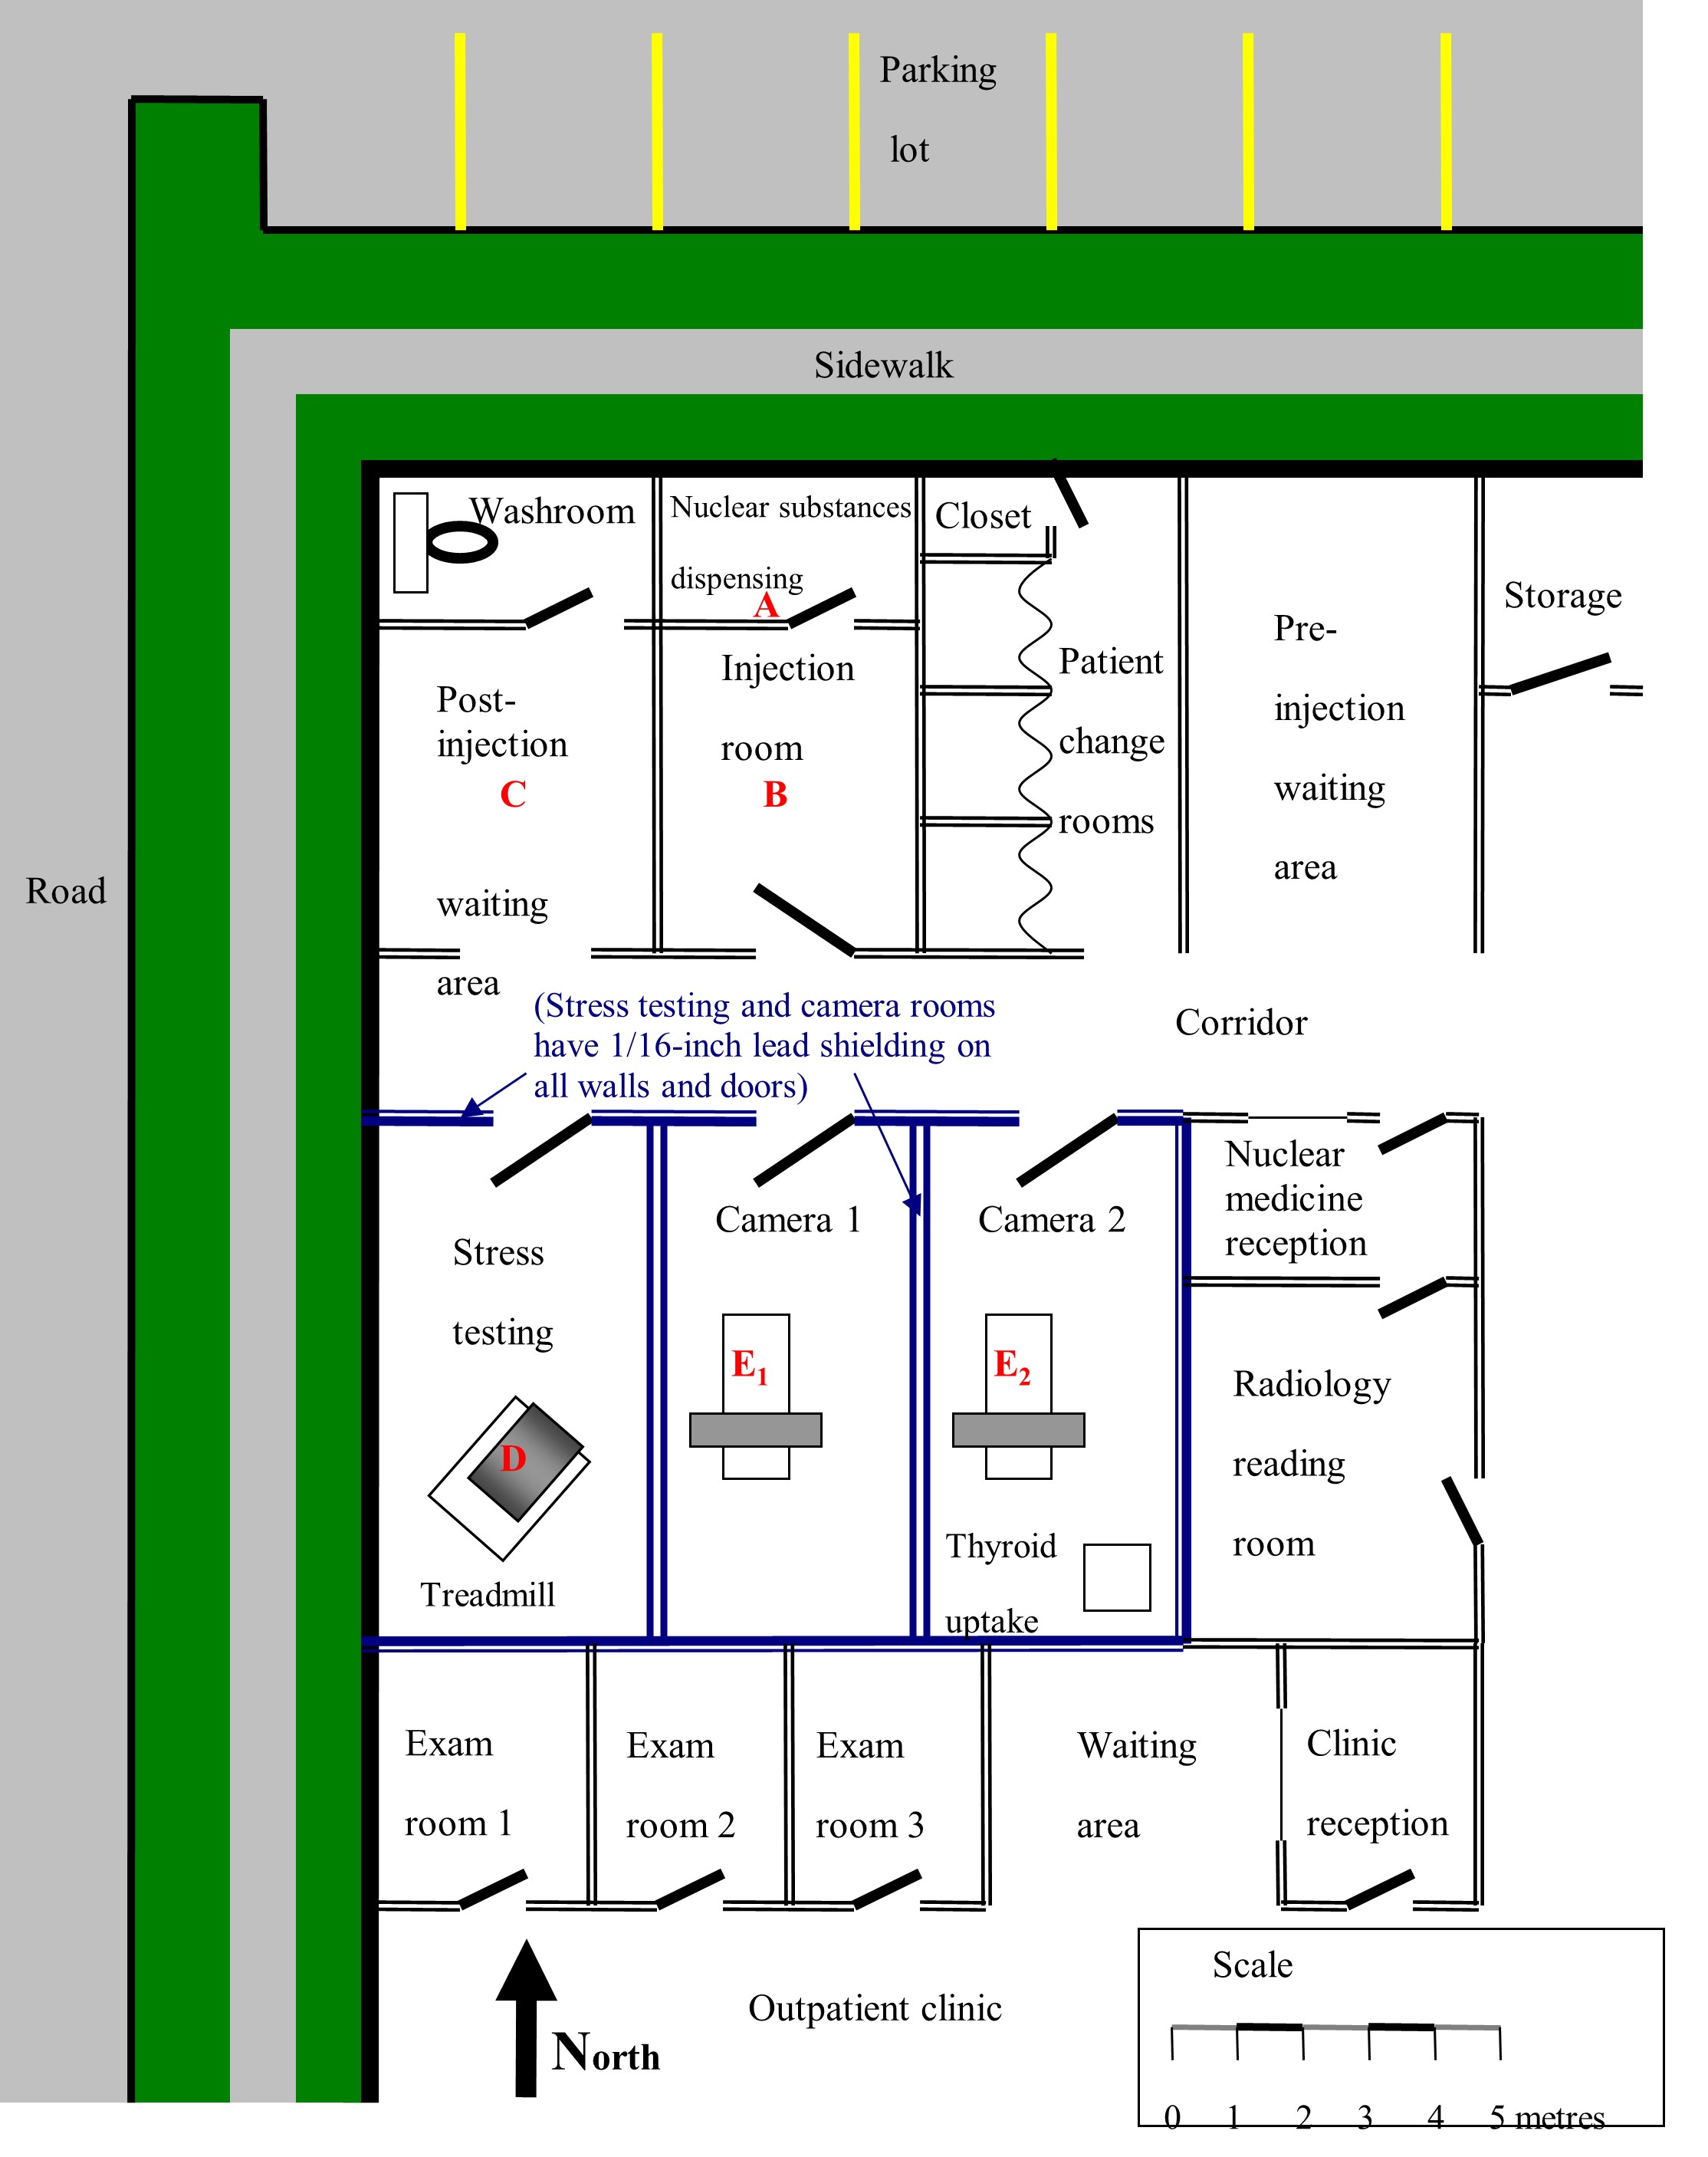 Alt text: Image displays a hypothetical nuclear medicine department layout which includes waiting area, washroom, injection room, isotope dispensing room, patient change rooms, pre-injection waiting area, storage, stress testing room, 2 camera rooms, and a nuclear medicine reception area.  These rooms are labelled A to E for the purpose of identification of source location used in the dose rate calculations example. Other rooms outside of the department are also included as well as the corridor and road/sidewalk on the outside perimeter of the building.